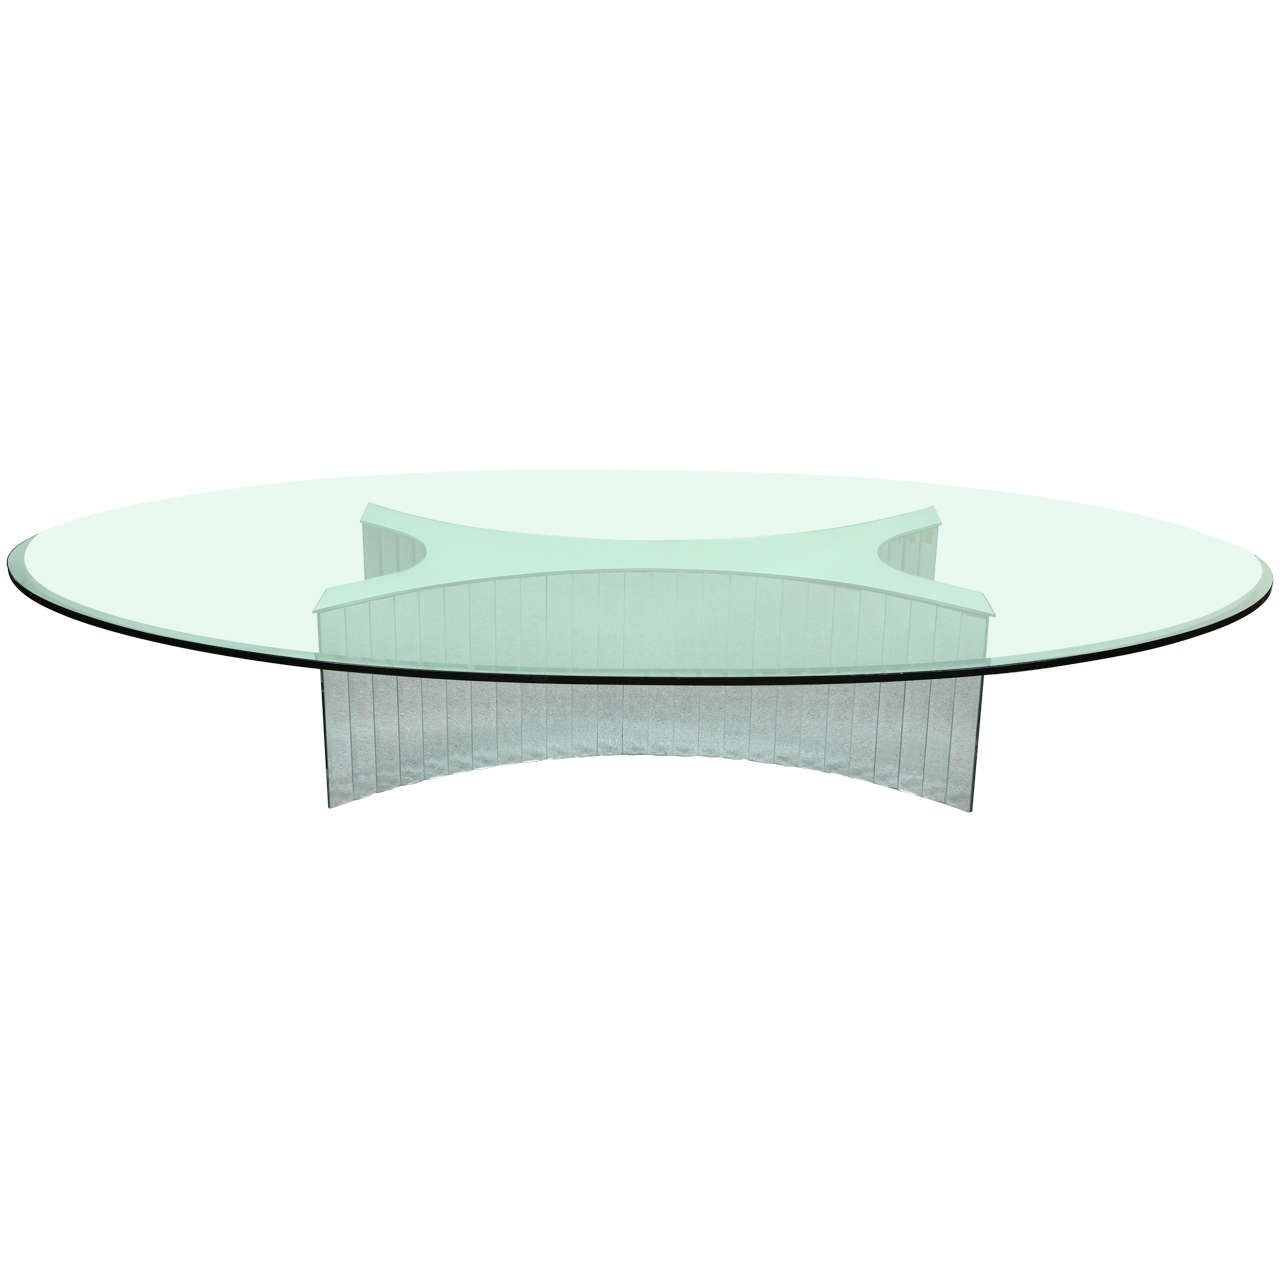 Fabulous Large Mirror snd Glass Oval Coffee Table